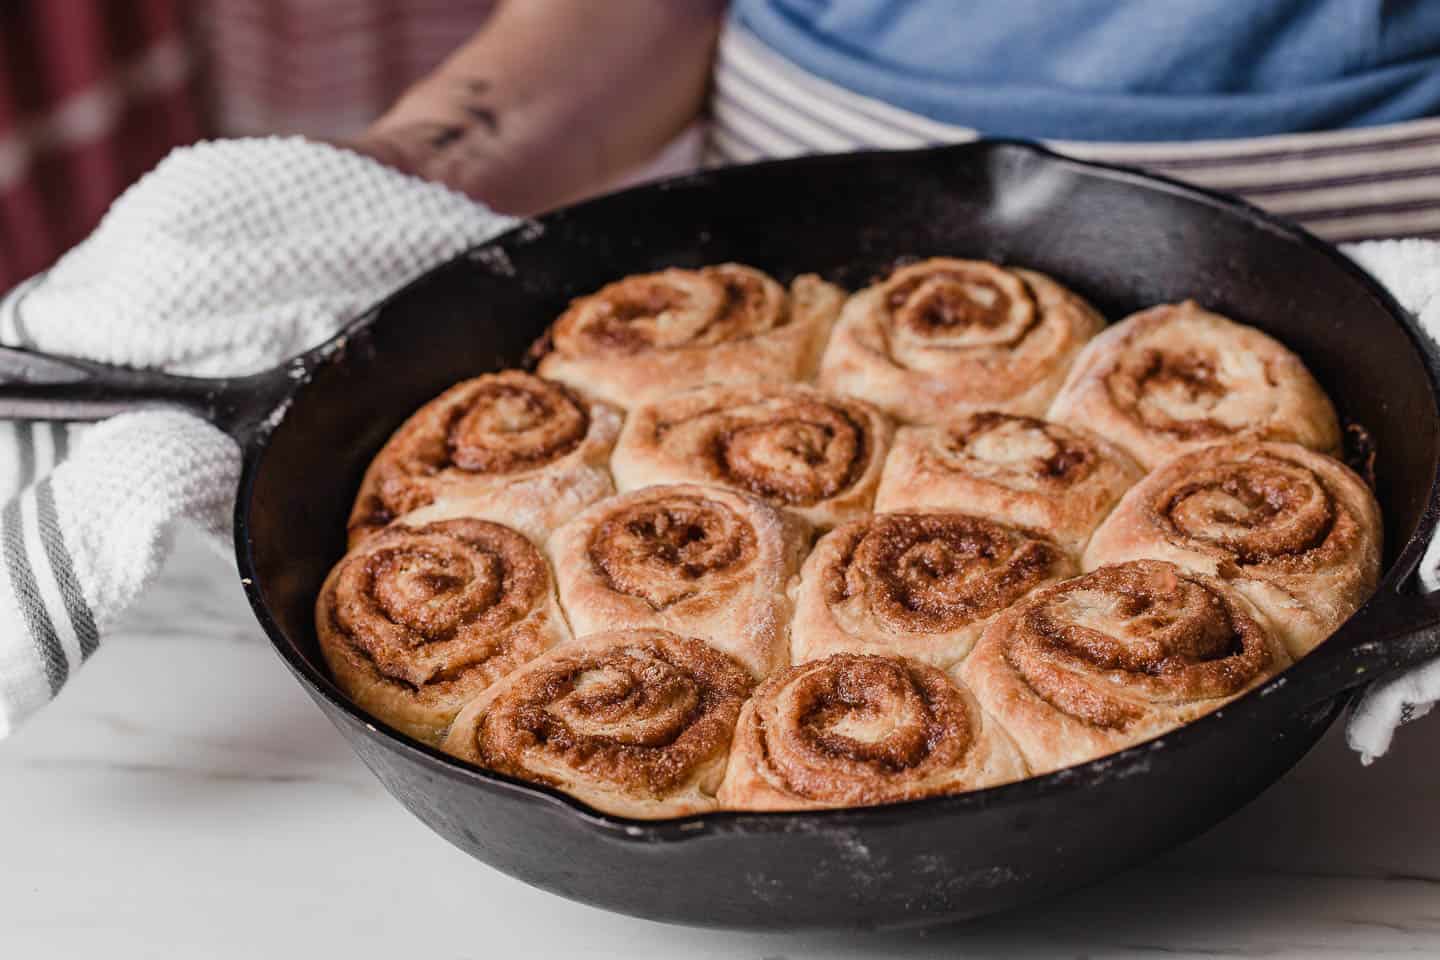 Sourdough cinnamon rolls fresh out of the oven.